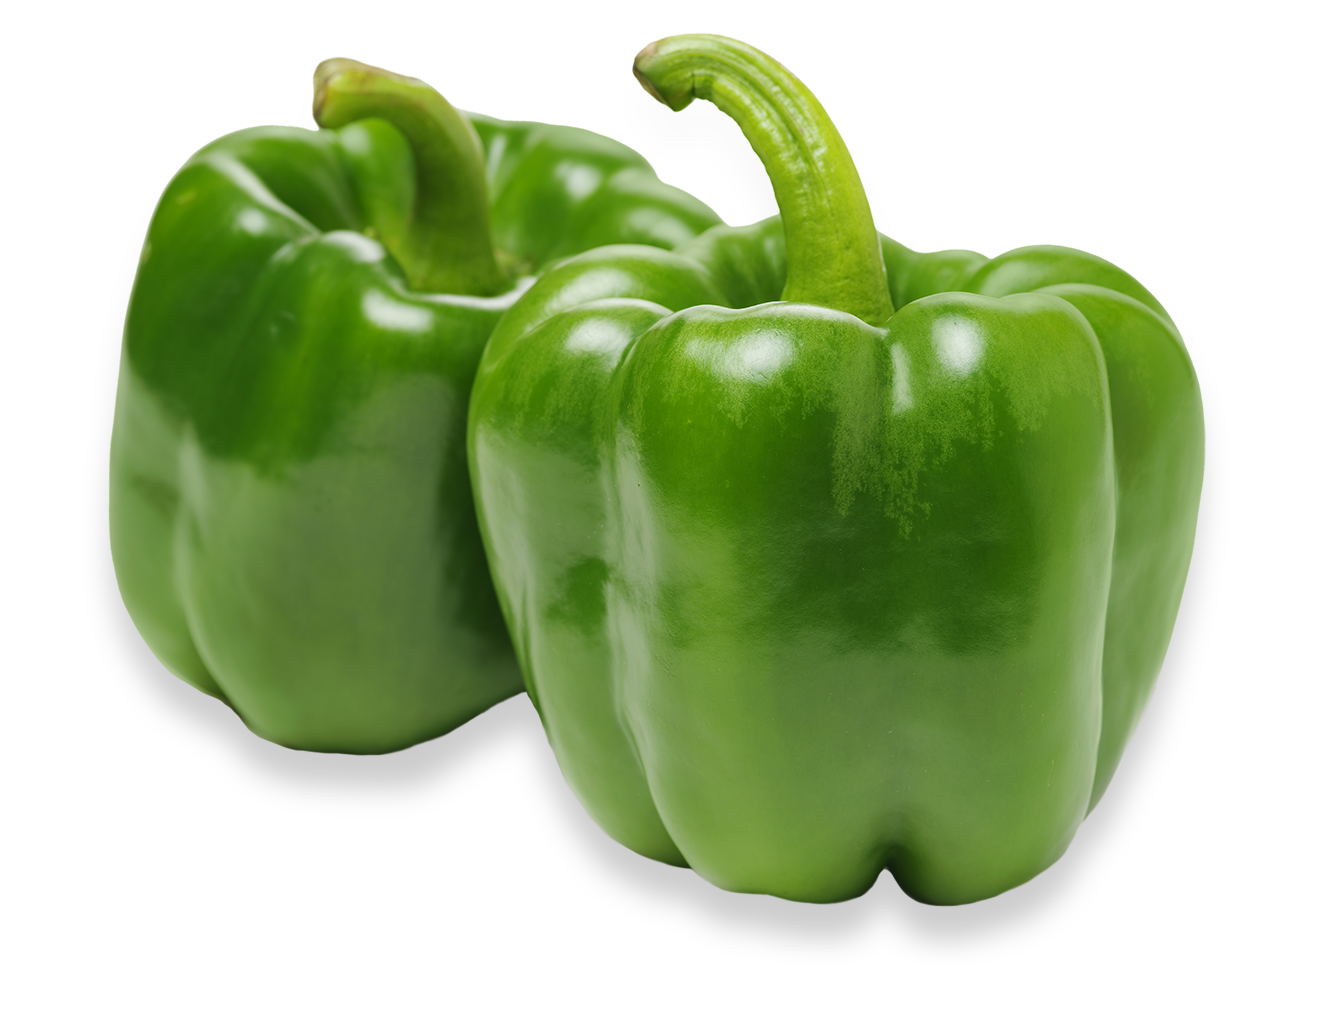 Green Bell Peppers  Lipman Family Farms